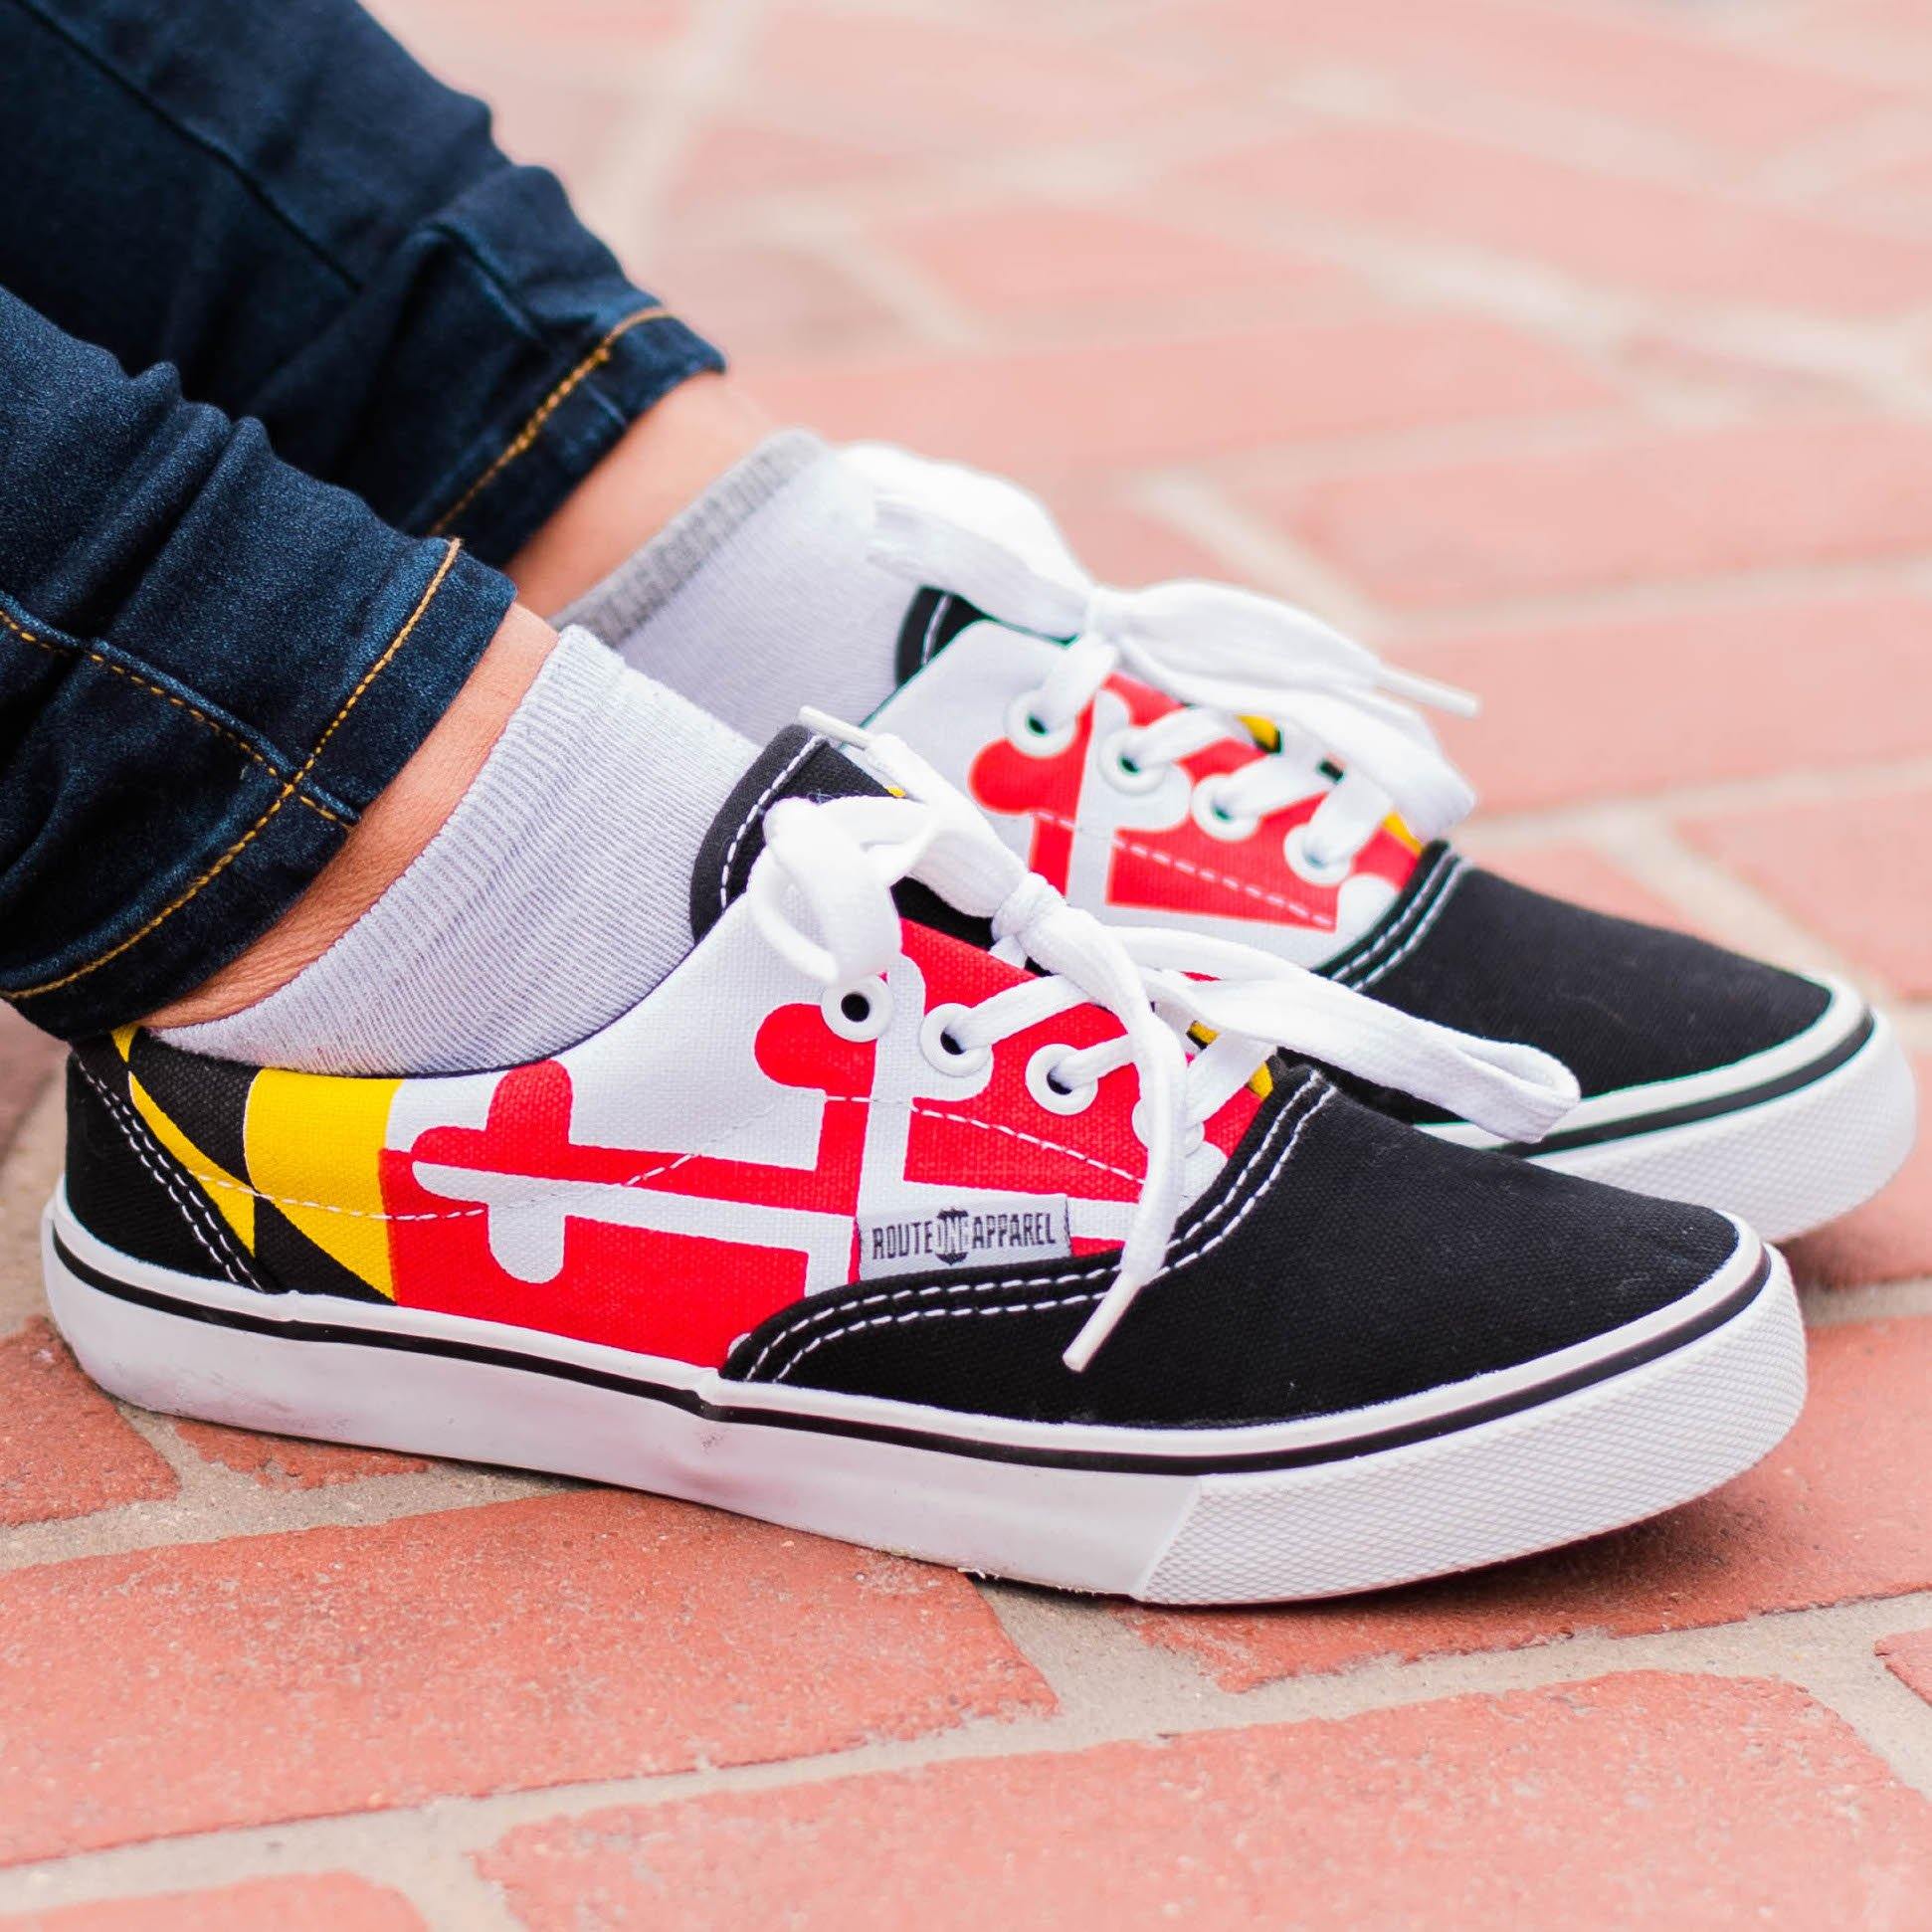 Maryland Flag (Black) / Shoes - Route One Apparel